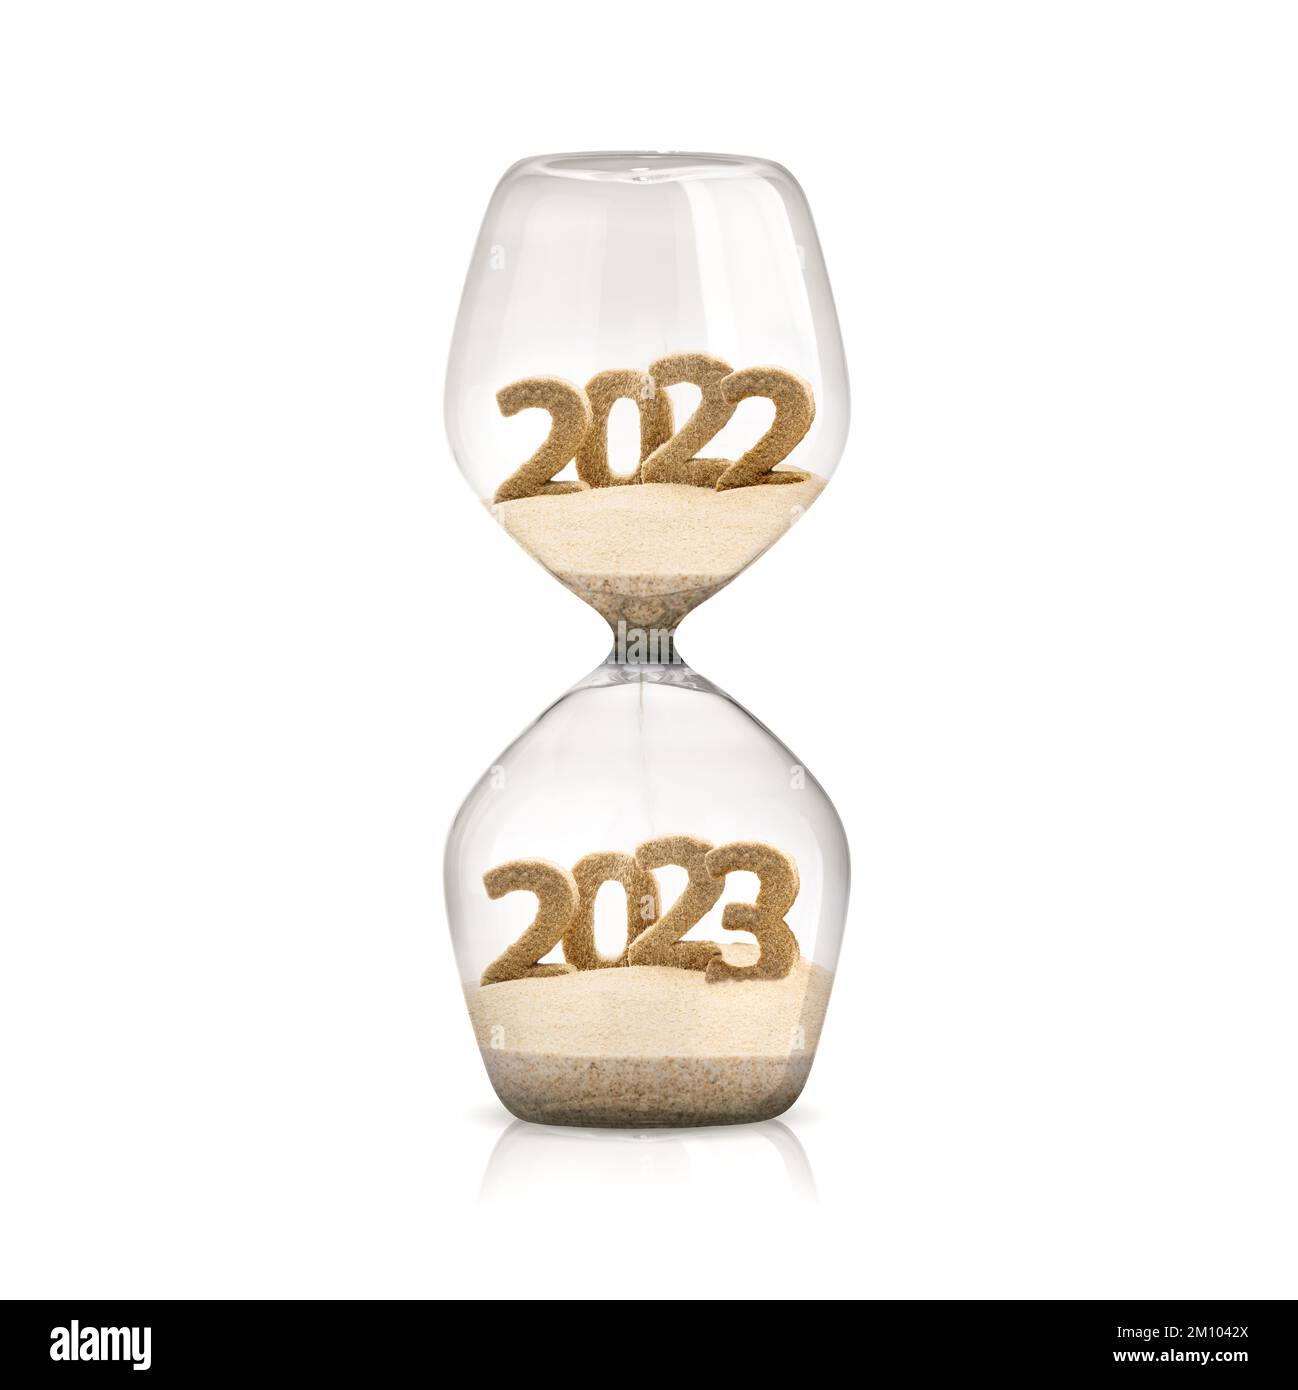 Sand watch 2023. Happy New Year. Greeting card template. 3D rendering. Transition from 2022 to 2023. Loading new year 2022 to 2023. 3D illustration. Stock Photo